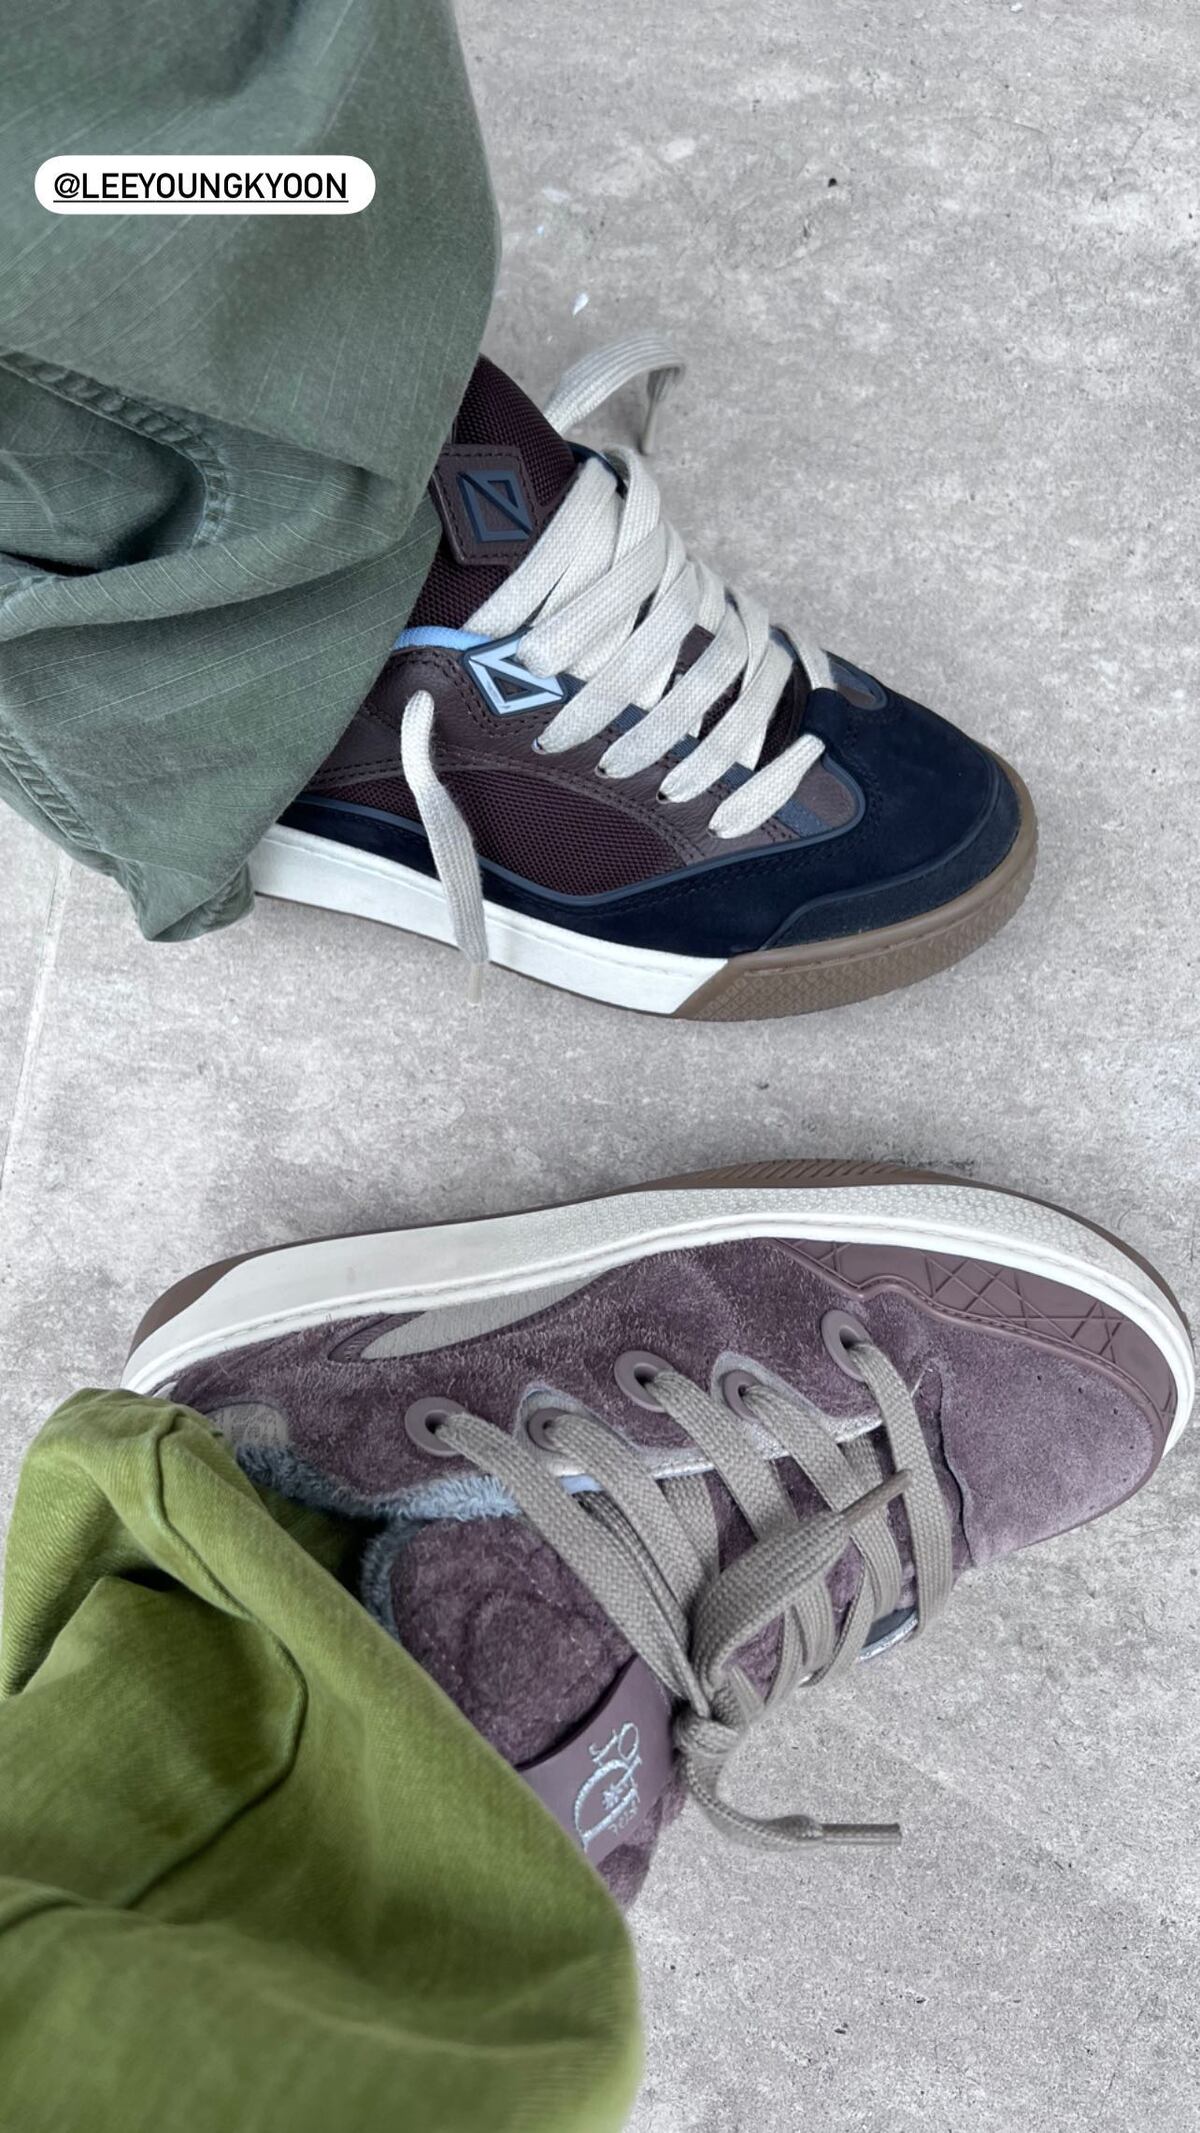 Take Another Look at the ERL x Dior B9S Skate Shoes